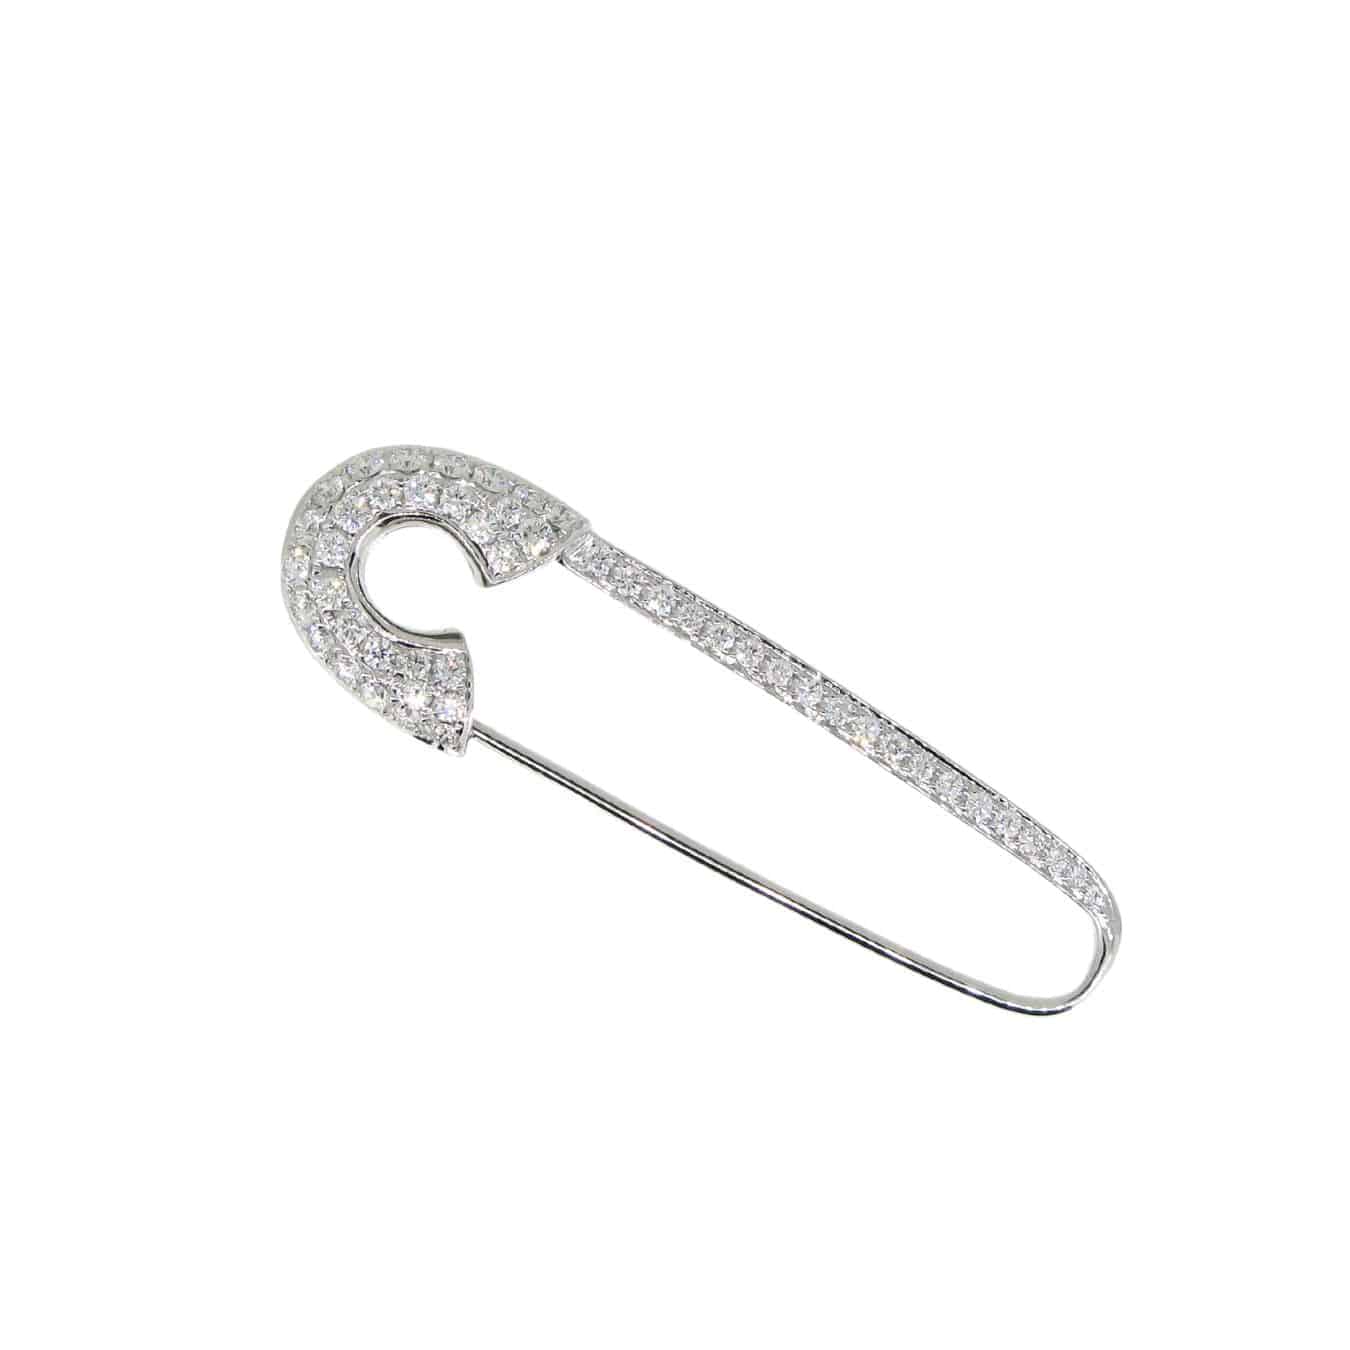 White Diamond Buckle Brooch (Large Size)